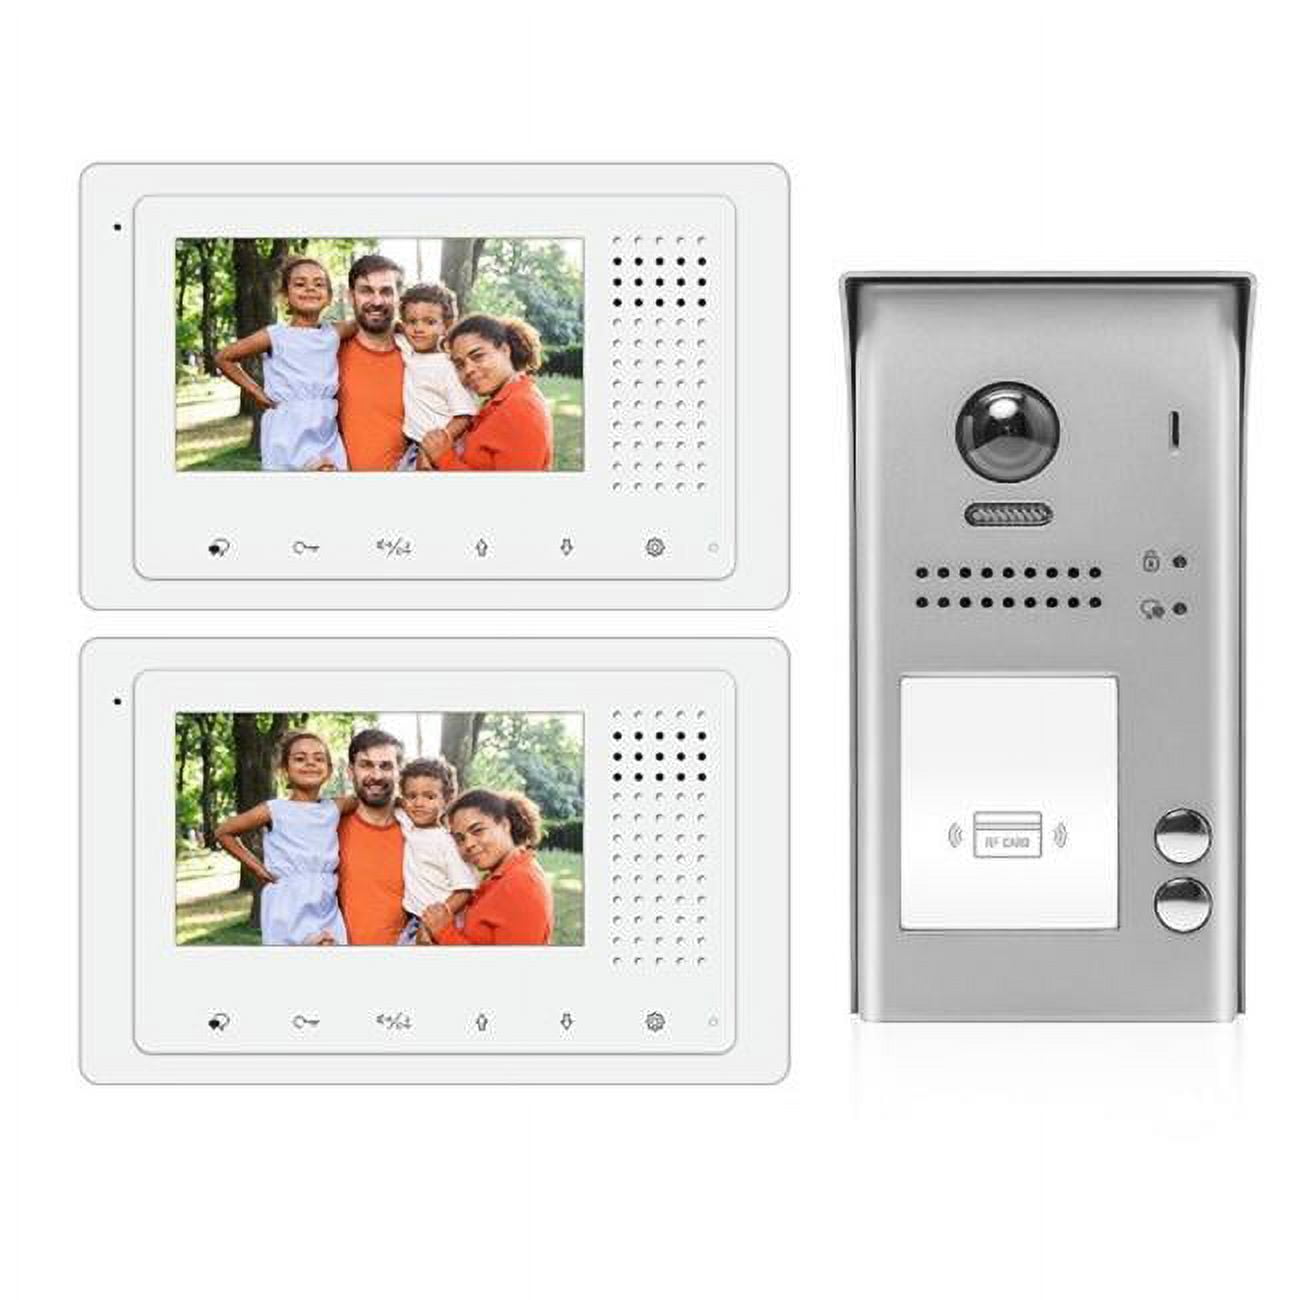 Picture of 2Easy Video Intercom System 1723-N 4.3 in. 2 Wire Audio & Video Doorbell Intercom System Entry Monitor Kit - 2 Apartment with 2 Color